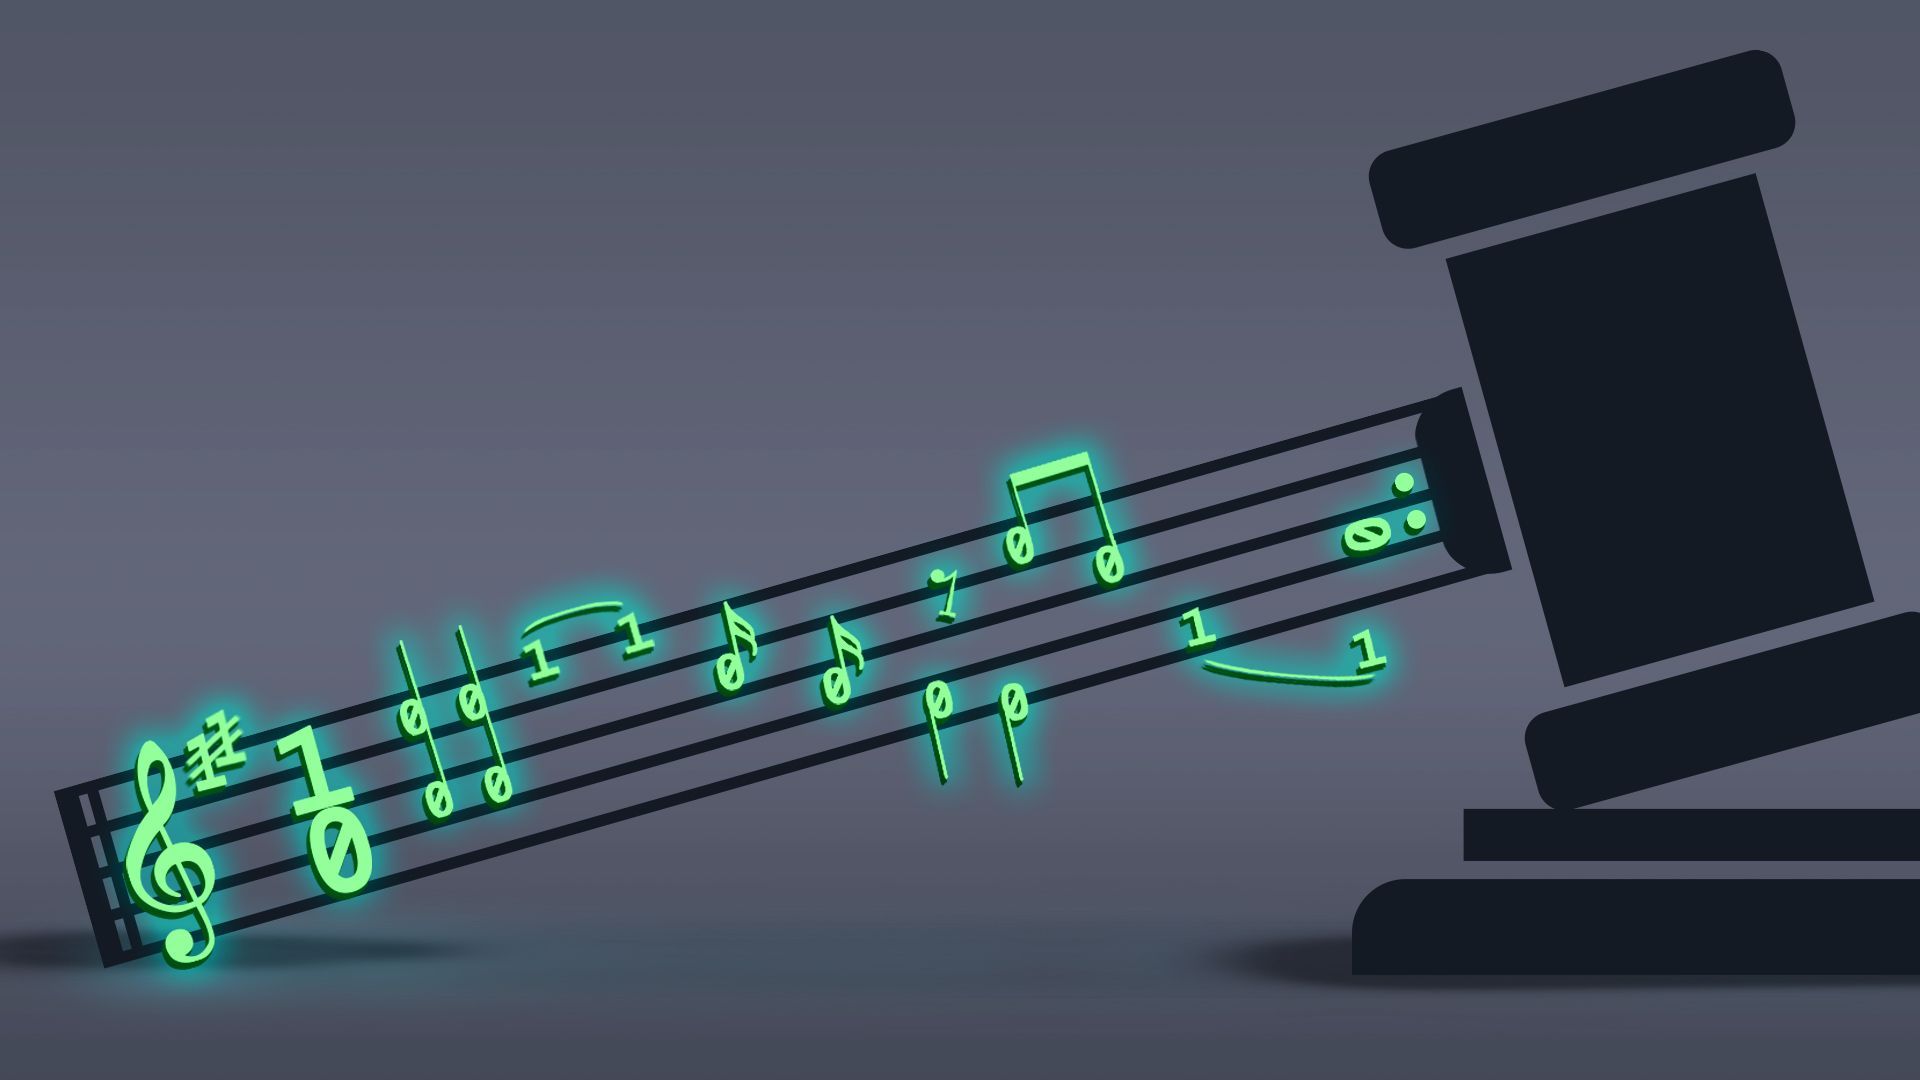 Illustration of a gavel icon with the handle made from a music staff covered in music notes made from zeroes and ones.